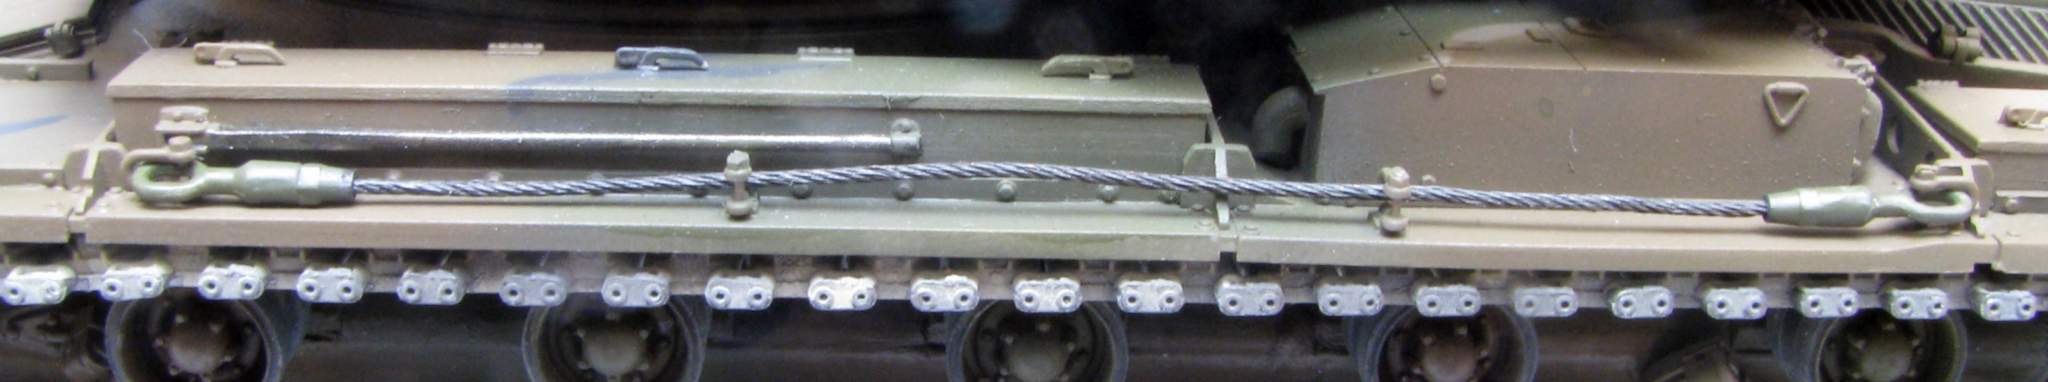 tow_cable01.jpg